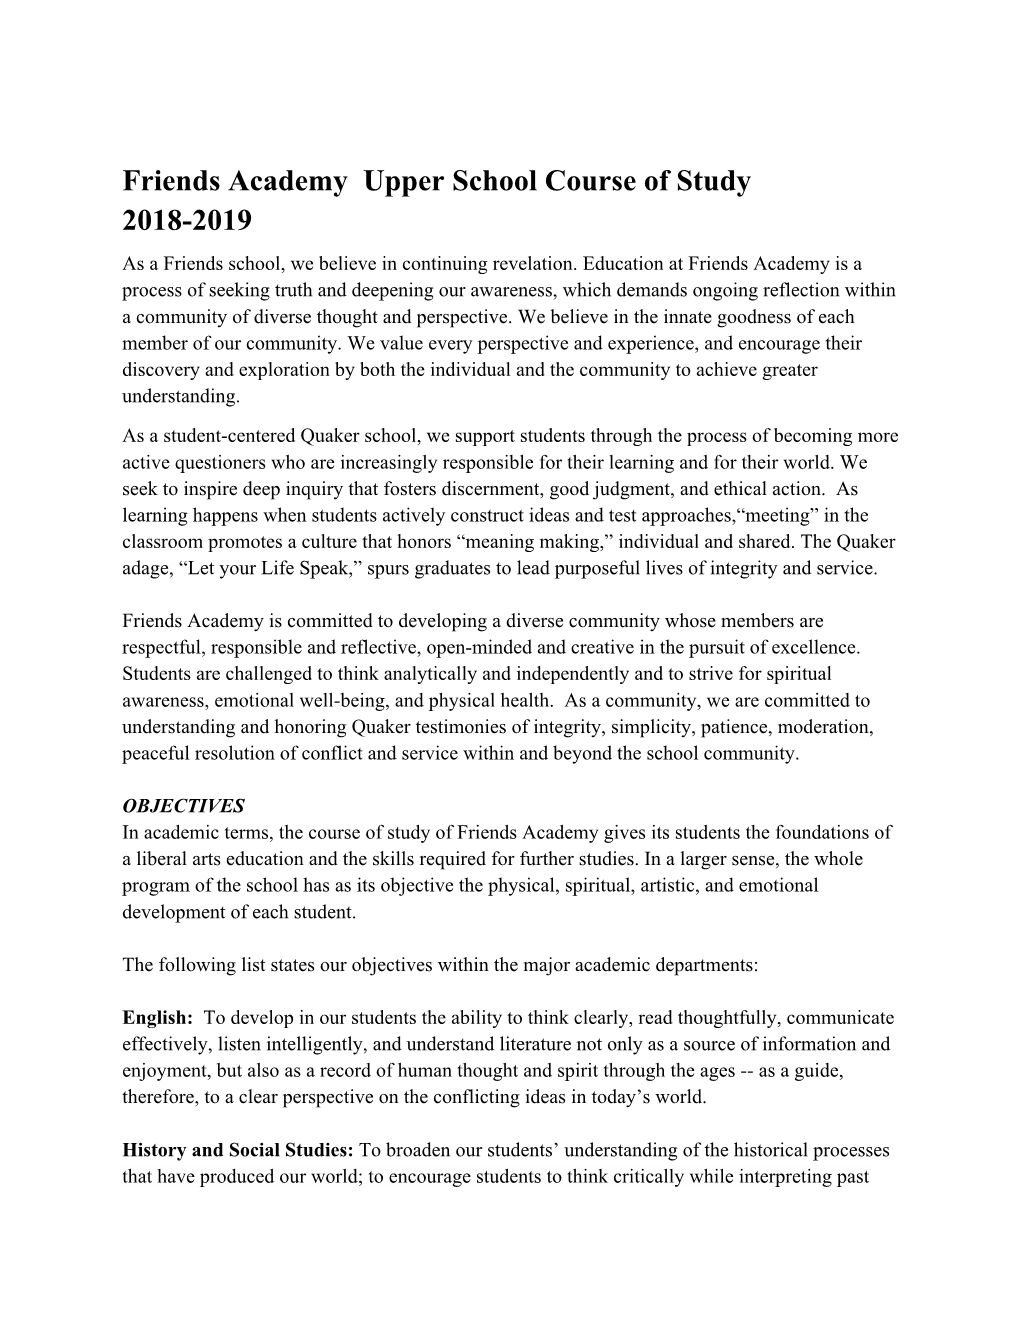 Friends Academy Upper School Course of Study 2018-2019 As a Friends School, We Believe in Continuing Revelation